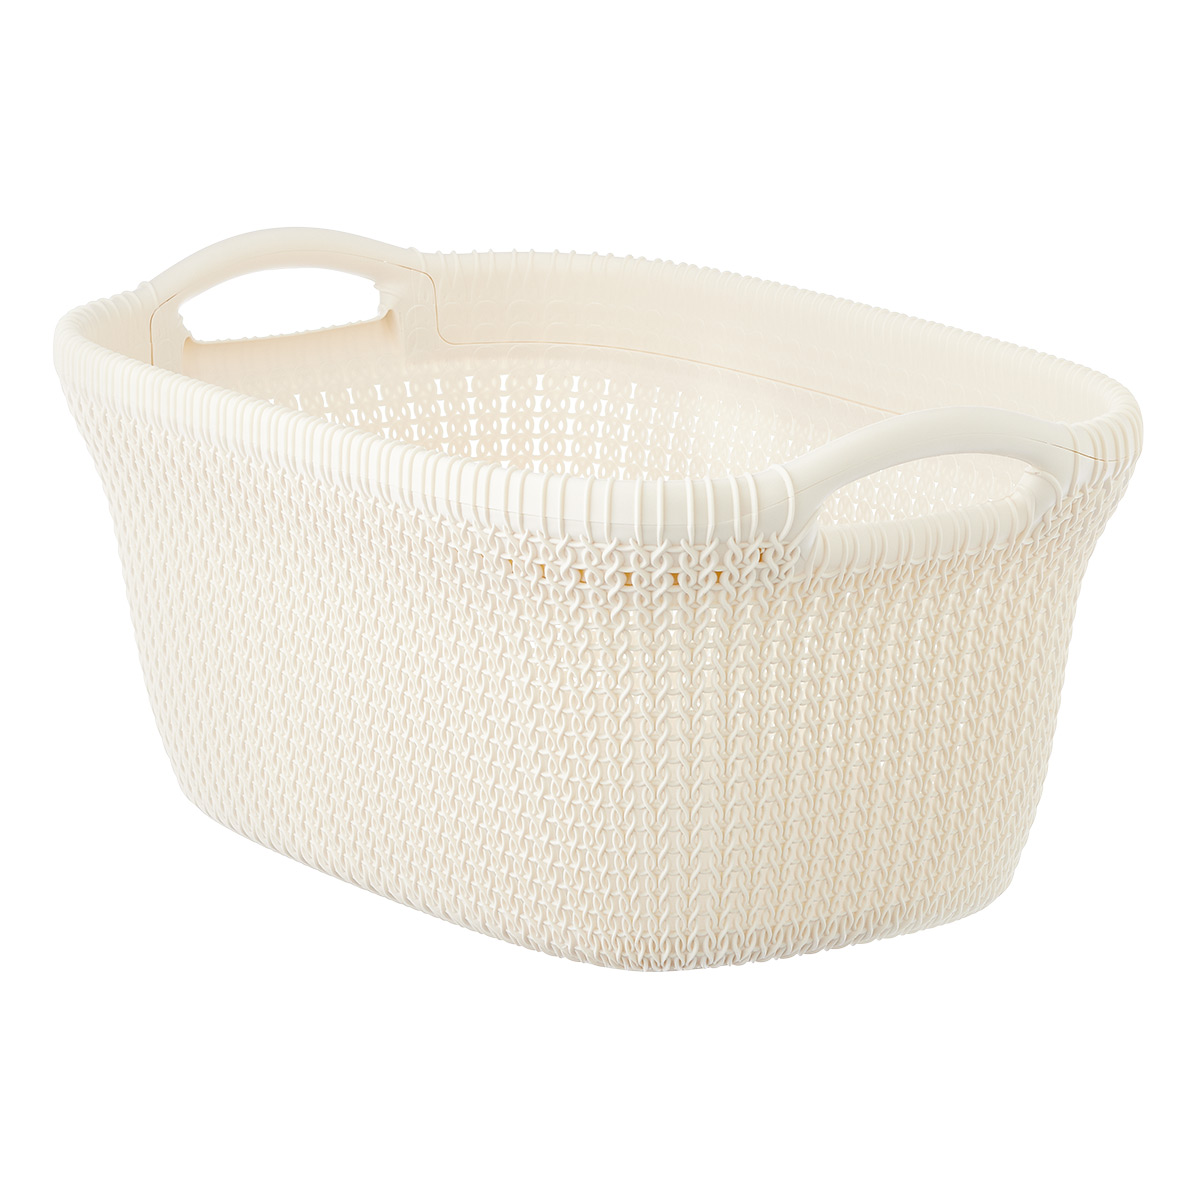 Curver Knit Laundry Basket | The Container Store